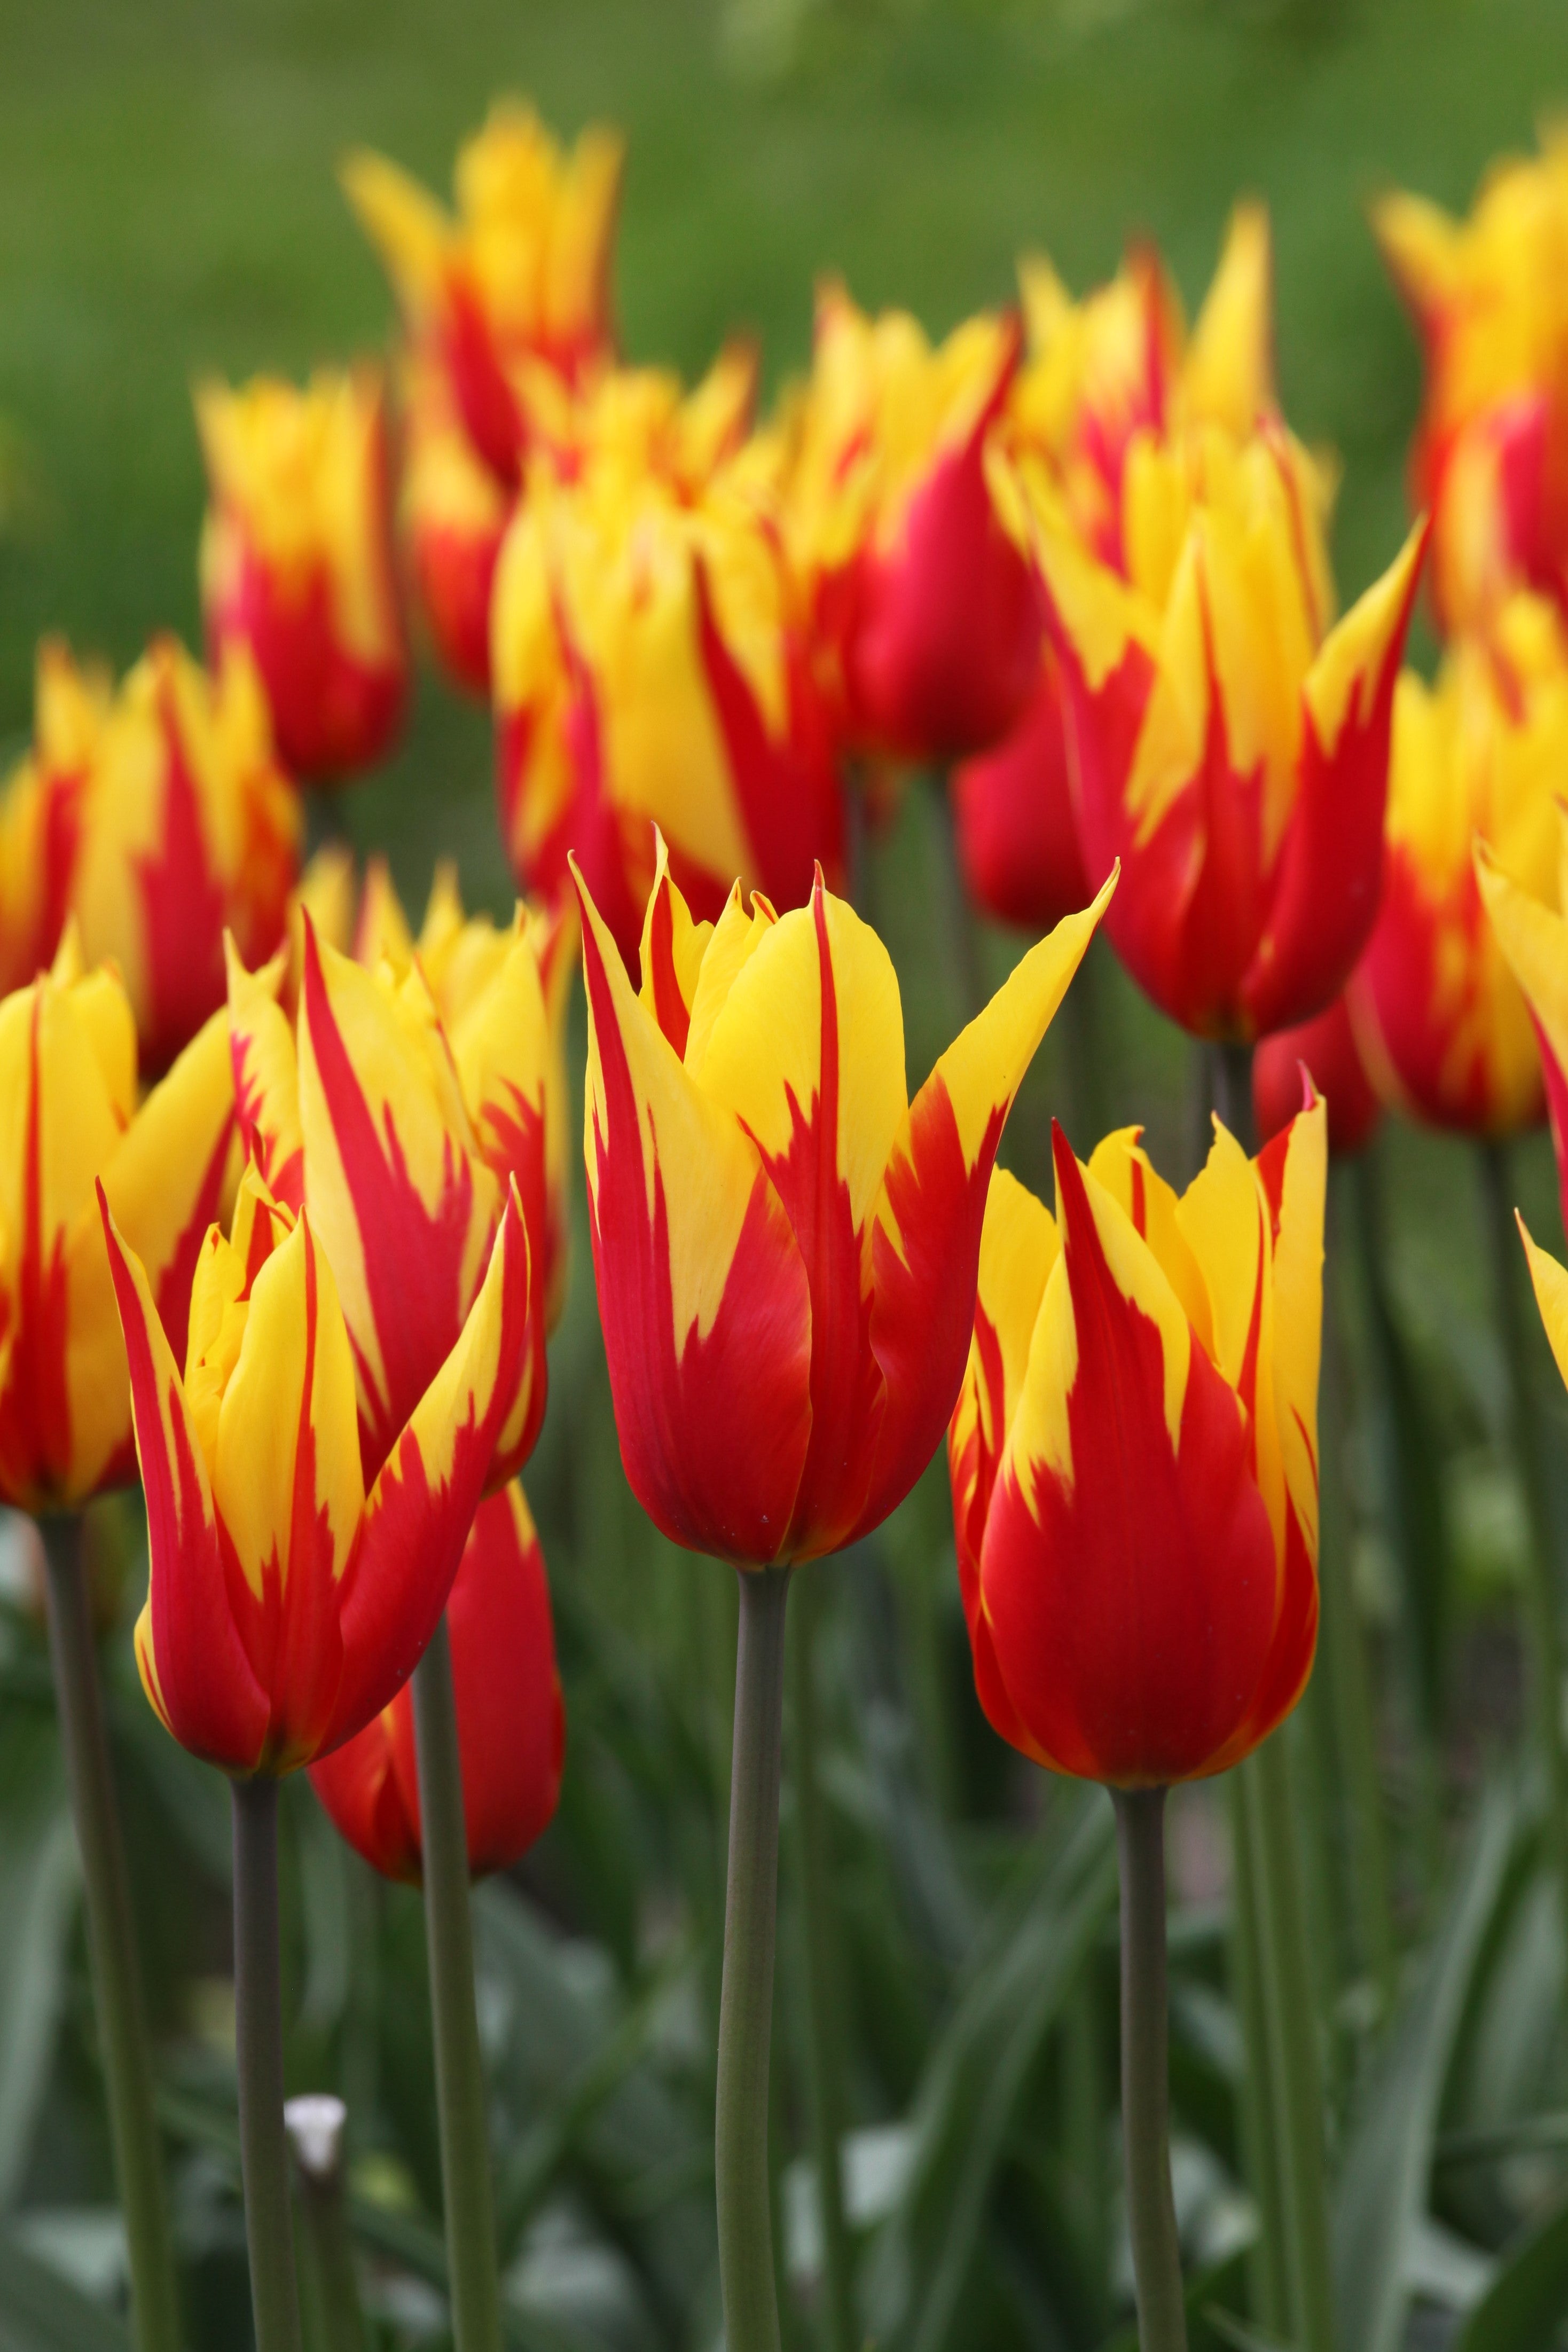 Lily flowering tulip Firework has fire red with yellow pointed petals